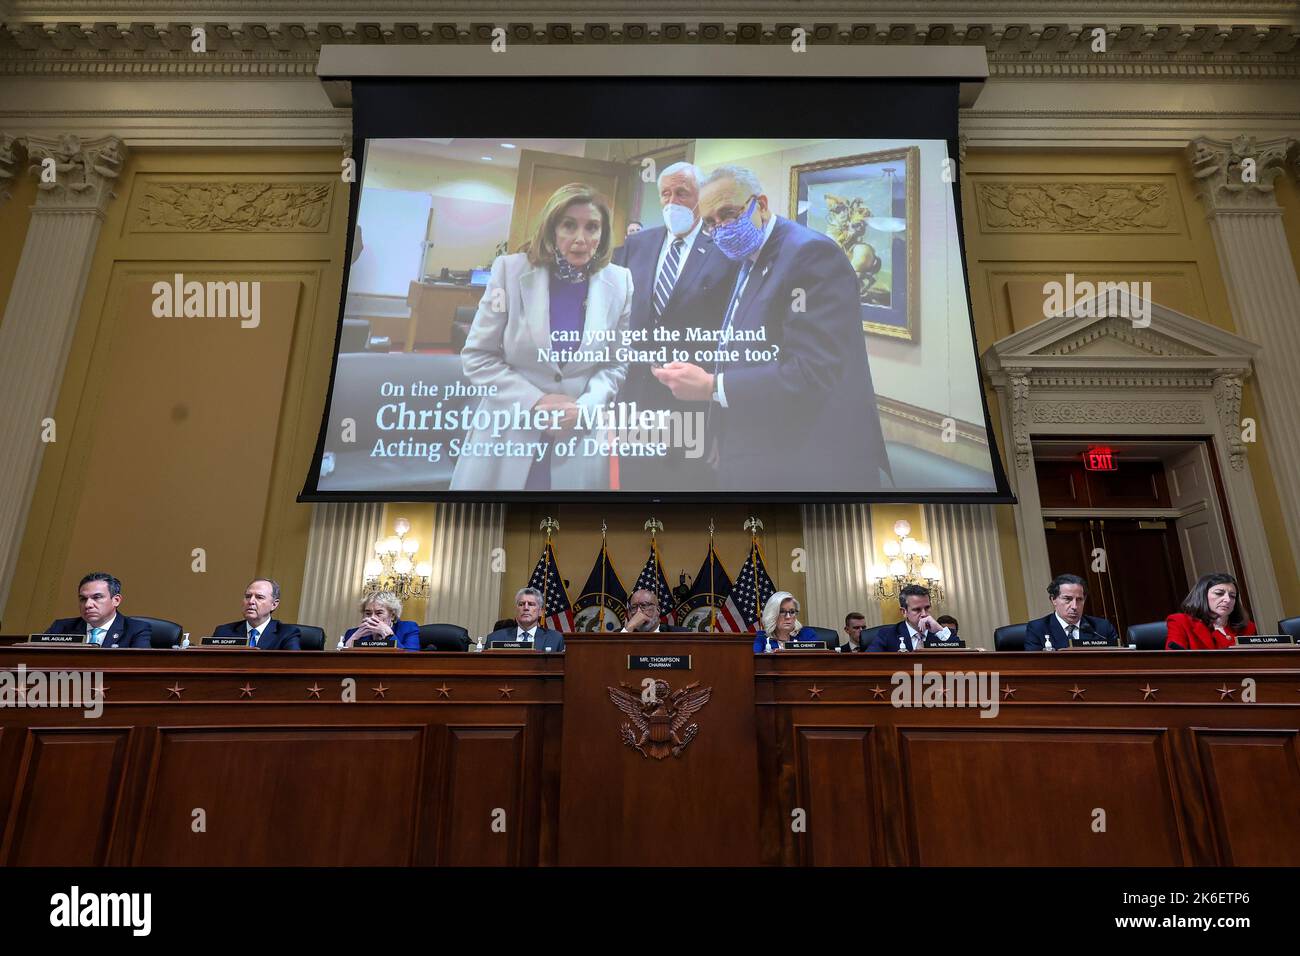 WASHINGTON, DC - OCTOBER 13: A video of Speaker of the United States House of Representatives Nancy Pelosi (Democrat of California), US Senate Majority Leader Chuck Schumer (Democrat of New York), and US House Majority Leader Steny Hoyer (Democrat of Maryland) is played during a hearing by the House Select Committee to Investigate the January 6th Attack on the U.S. Capitol in the Cannon House Office Building on October 13, 2022 in Washington, DC. The bipartisan committee, in possibly its final hearing, has been gathering evidence for almost a year related to the January 6 attack at the U.S. C Stock Photo